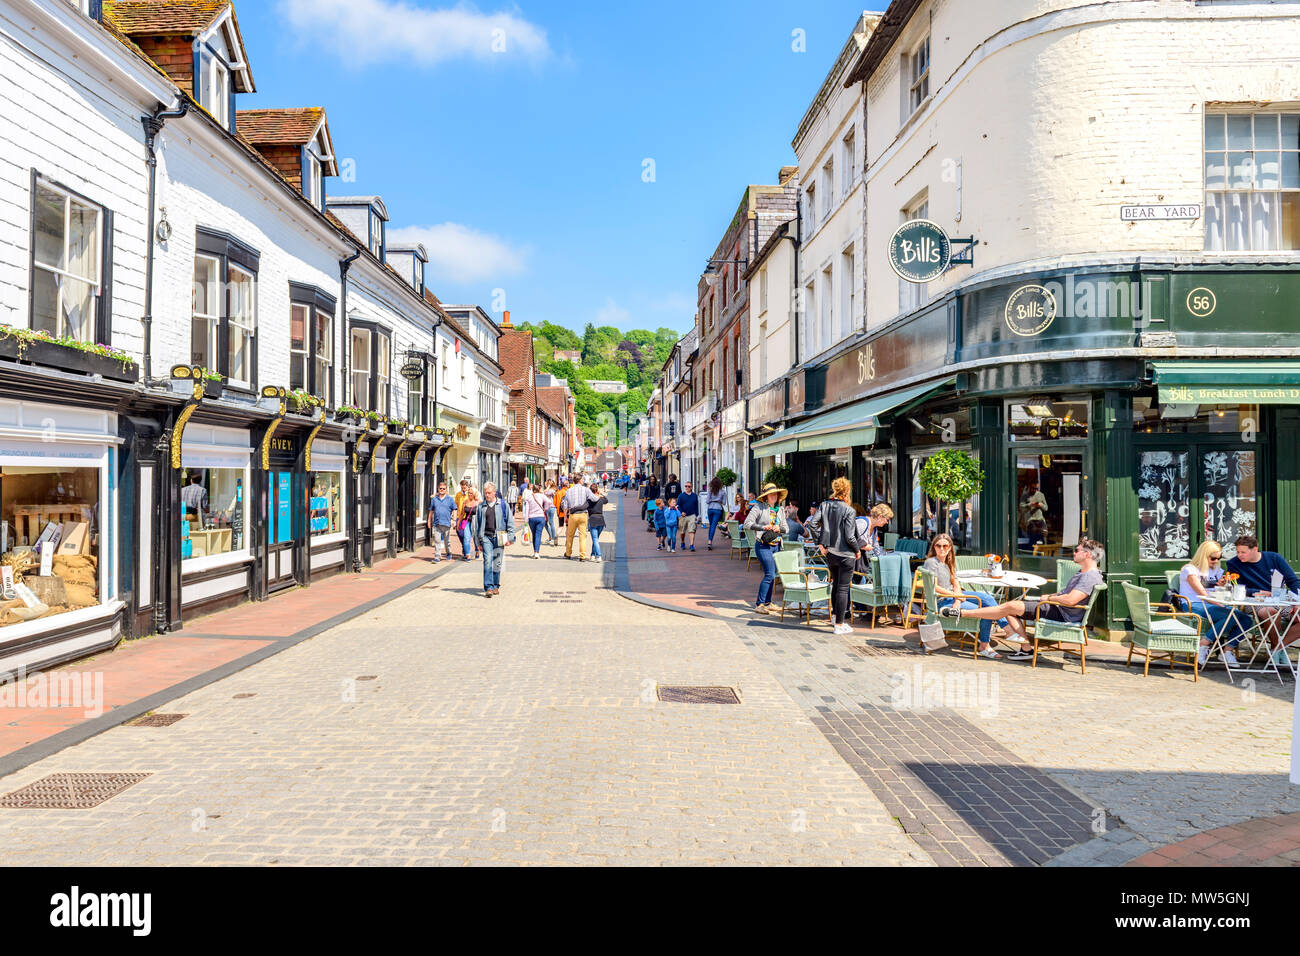 The high street Lewes, a pedestrianised shopping street Stock Photo